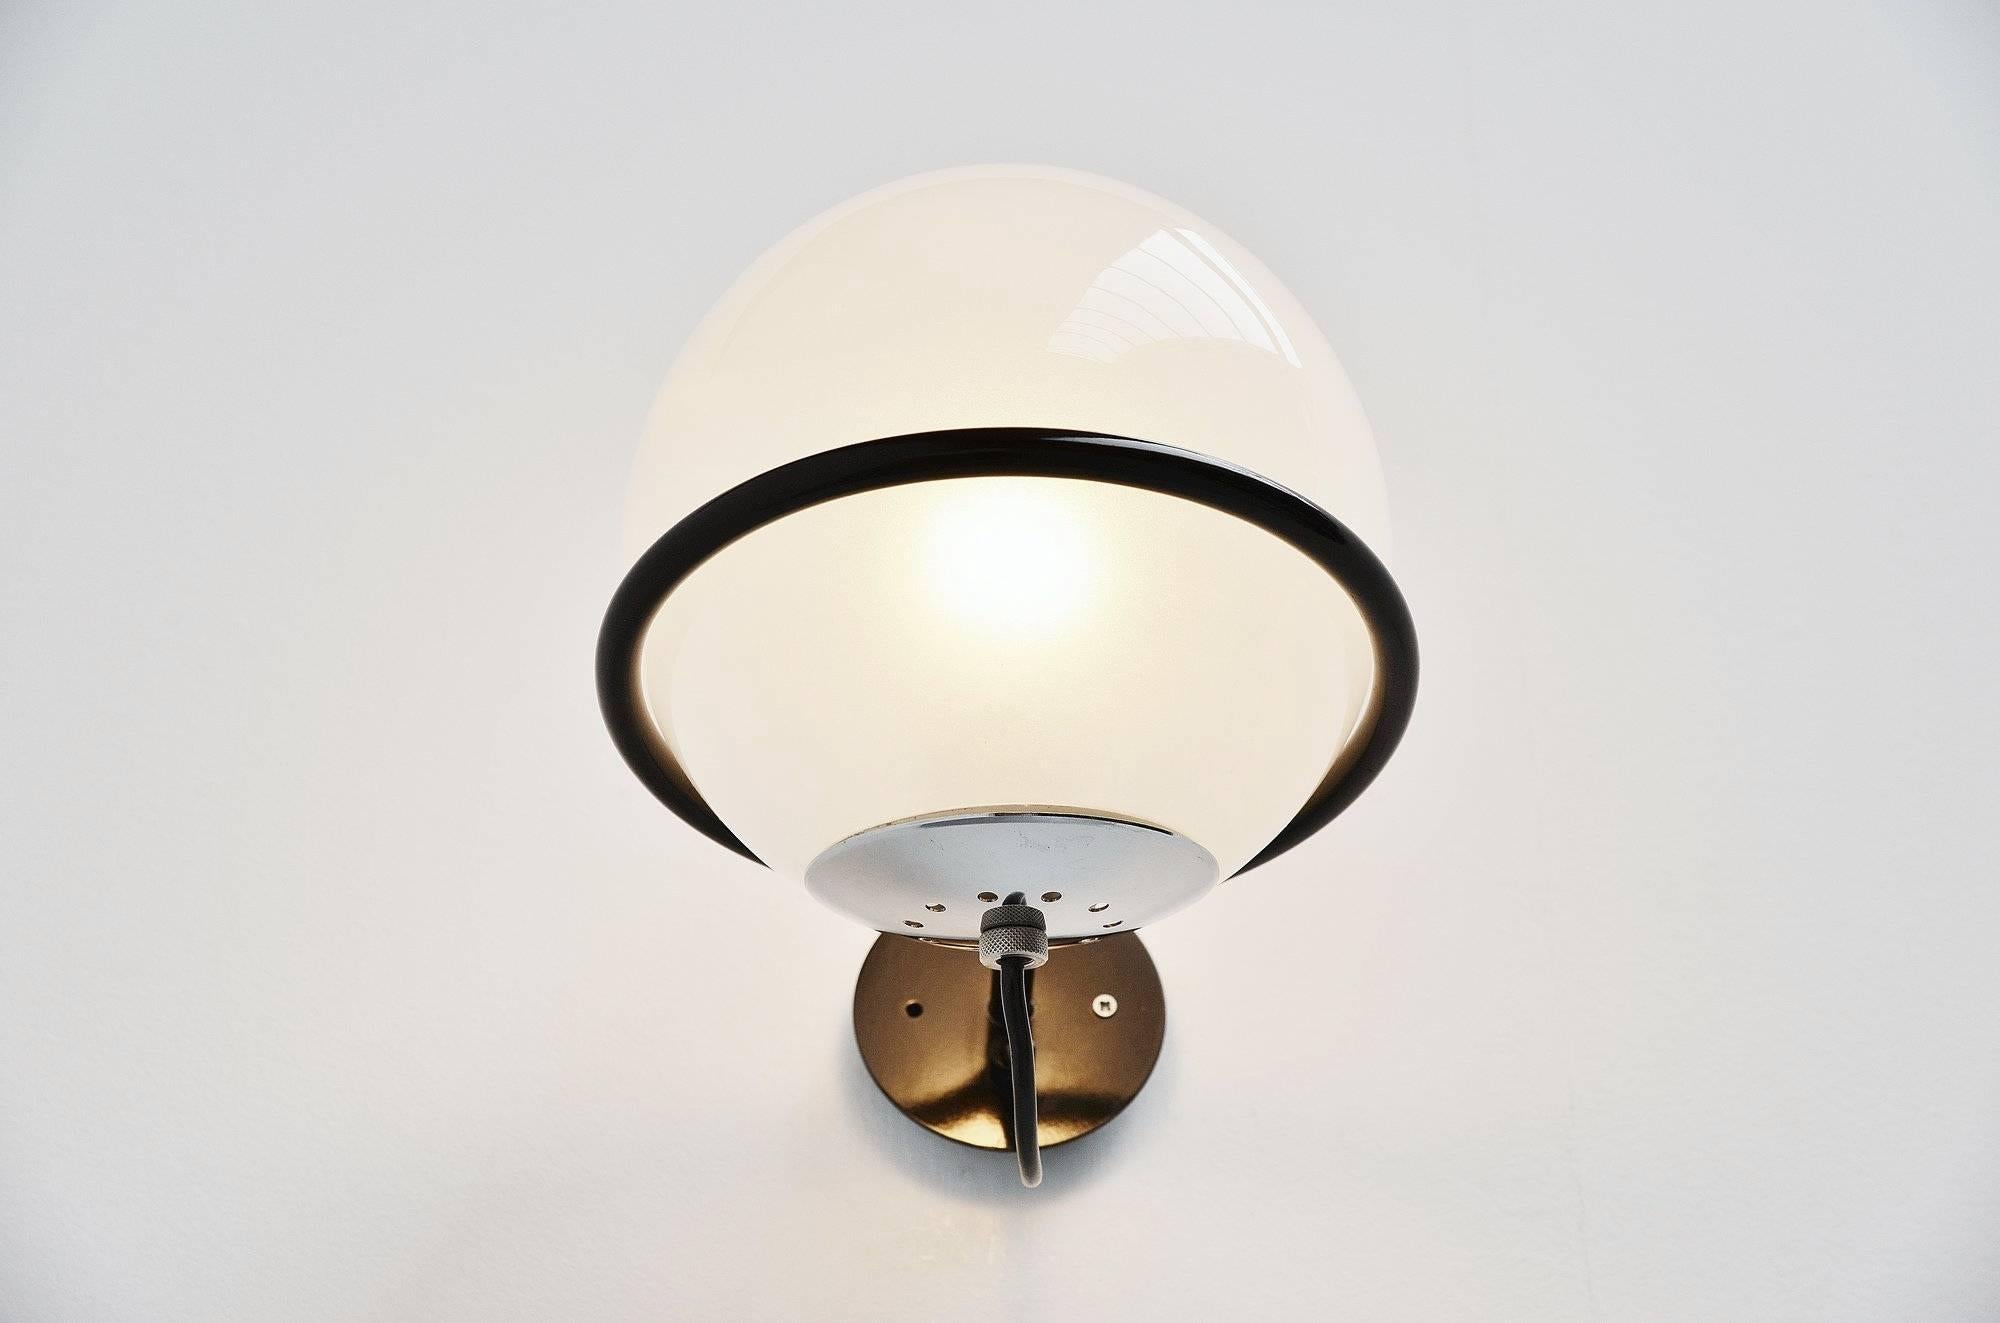 Single wall lamp model 238/1 designed by Gino Sarfatti, manufactured by Arteluce, Italy, 1960. This light has a diffuser sphere in frosted glass closed by the socket plate in anodized aluminum. The sphere rests on an iron ring lacquered in black.